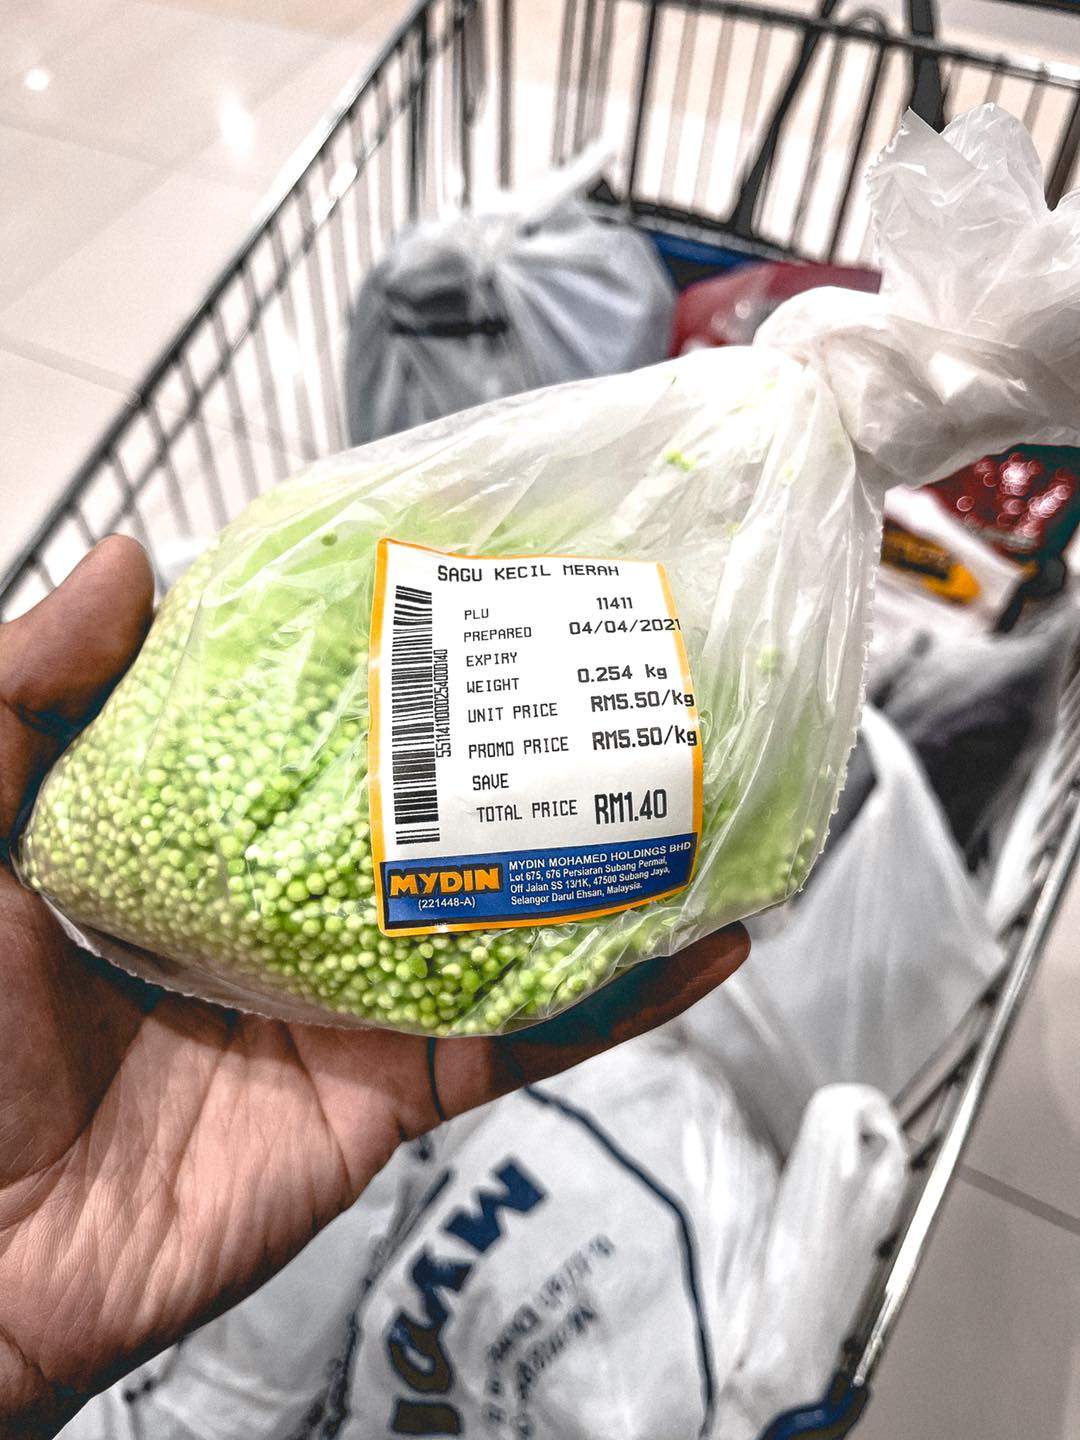 Rm400 for sago seeds? Author shares how he avoided disaster at mydin